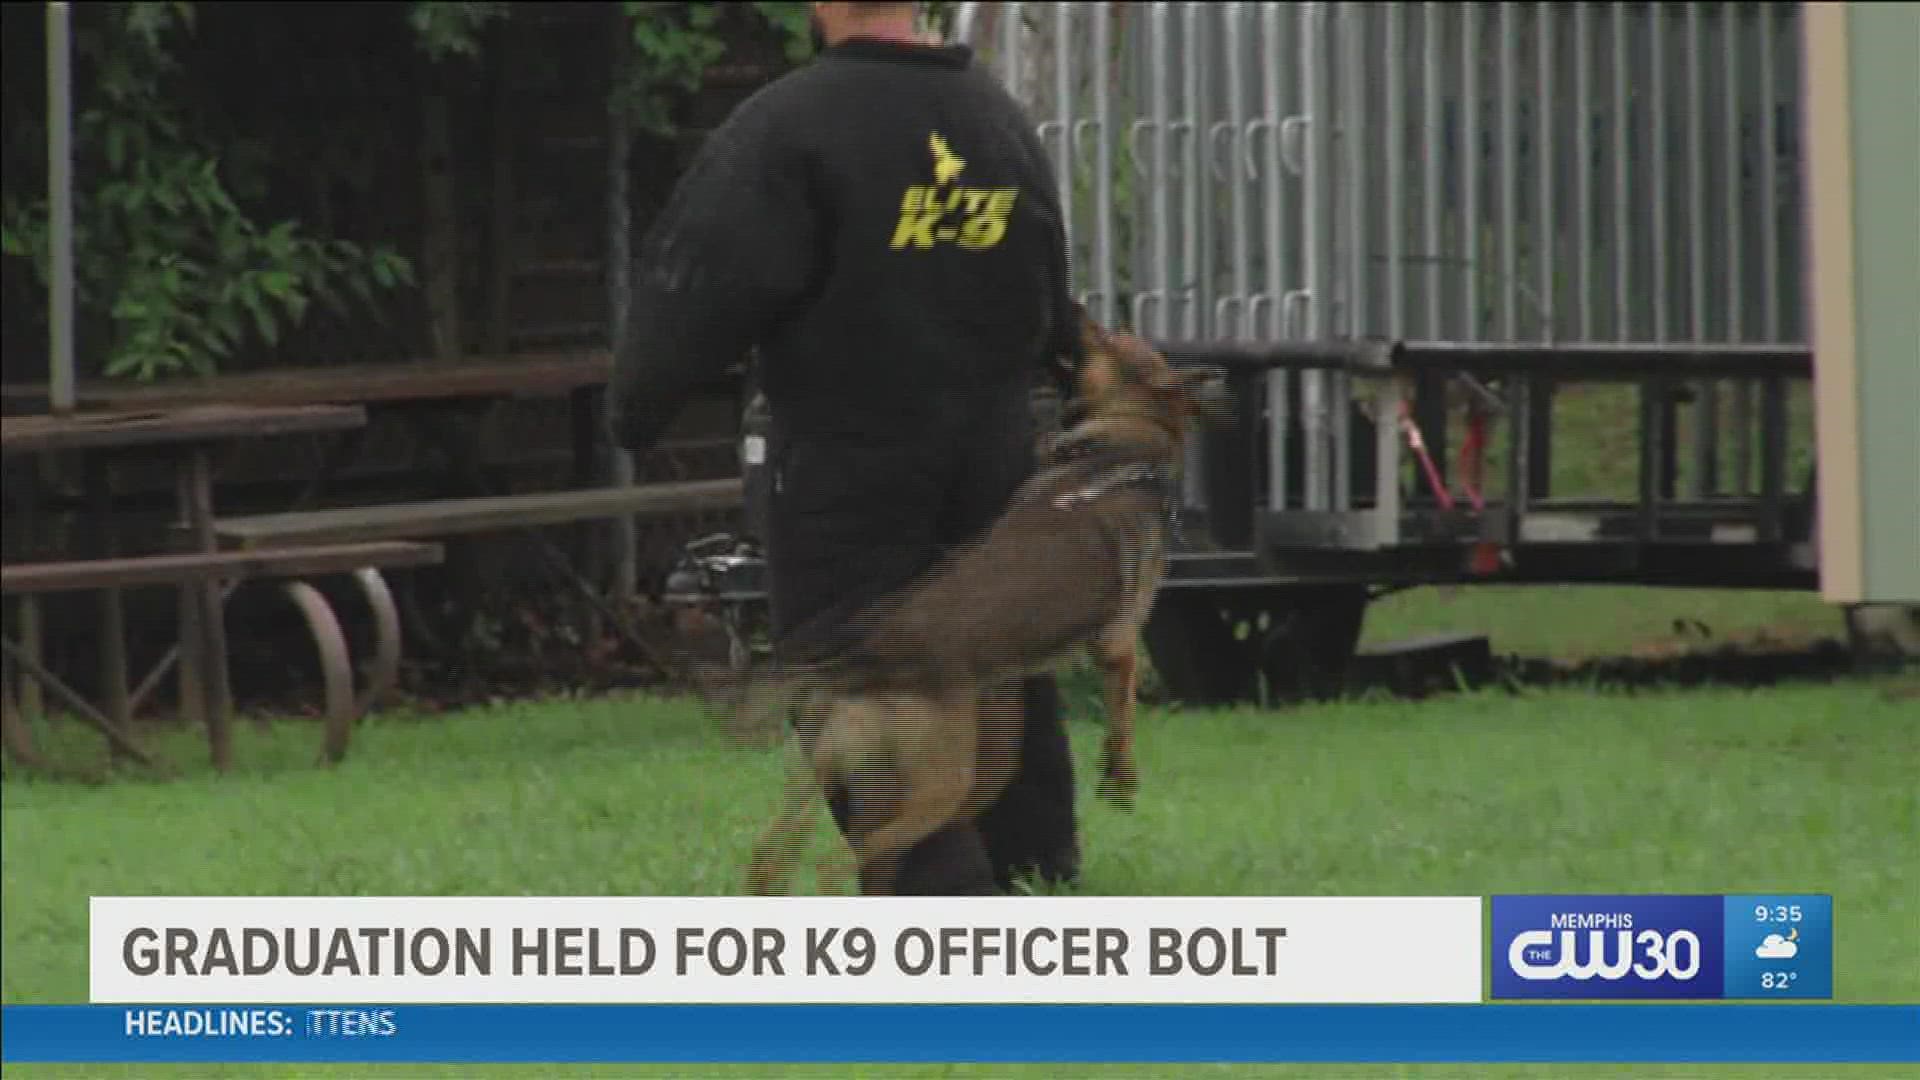 Bolt is named after Officer Sean Bolton, who was killed in the line of duty on Aug. 1, 2015.